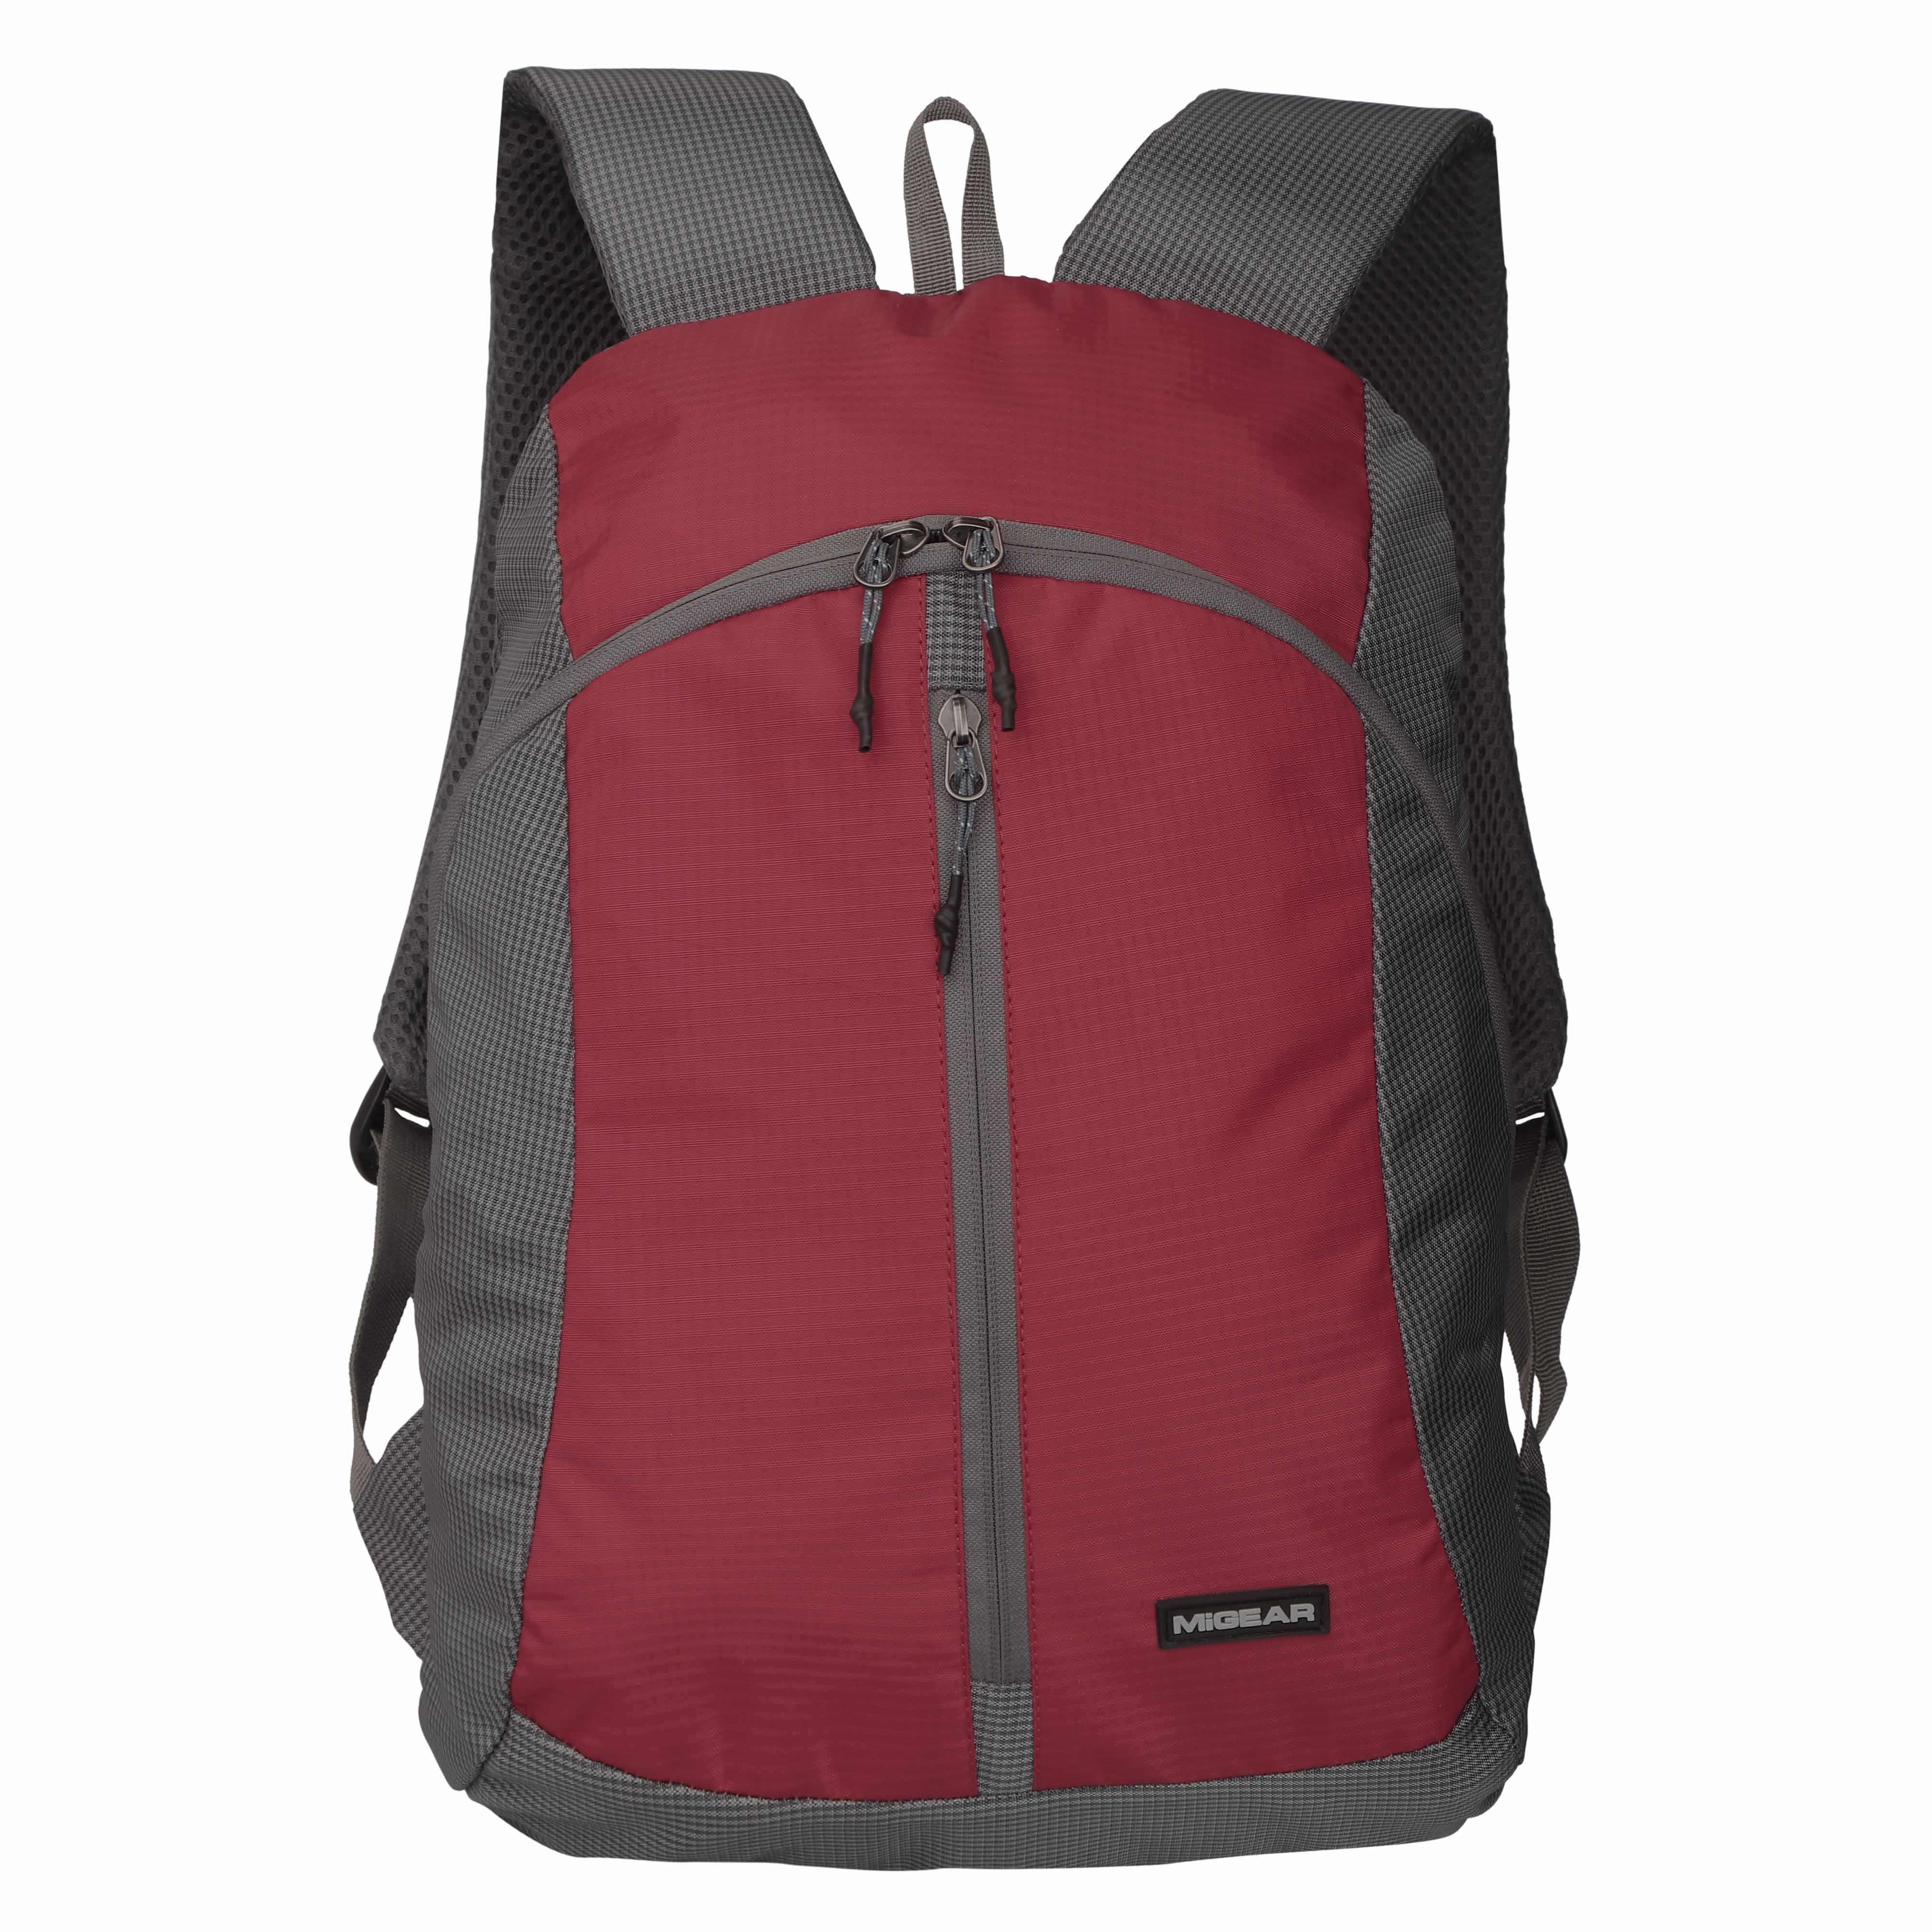 The Entice Laptop  Backpack